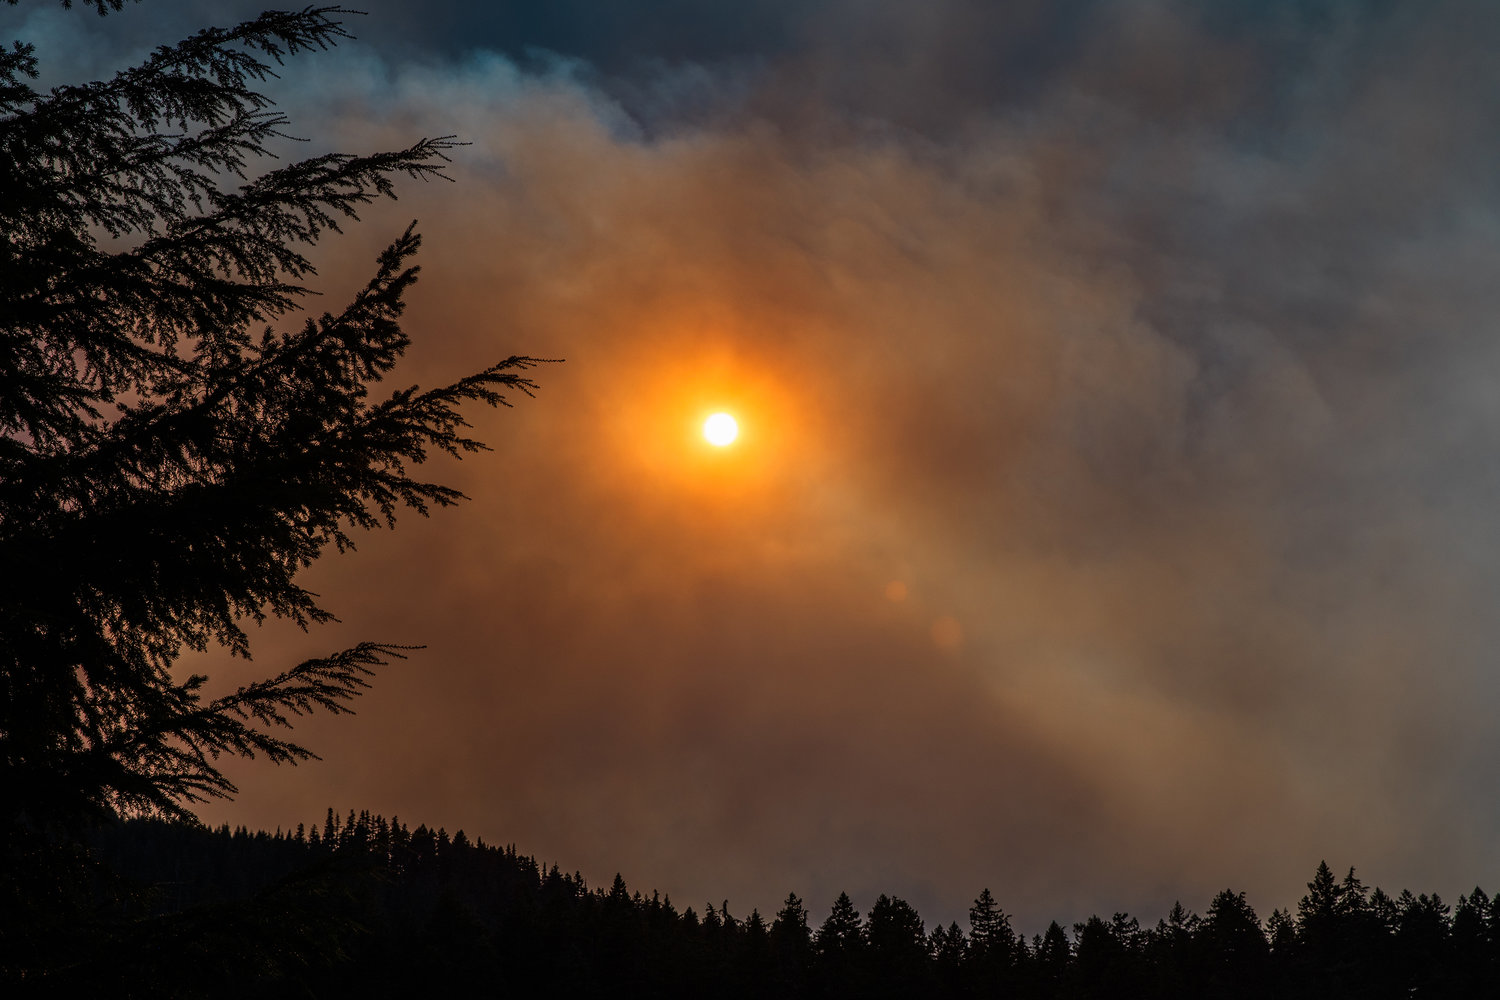 The sun beams through smoke from the Goat Rocks Fire near Packwood on Sunday afternoon.